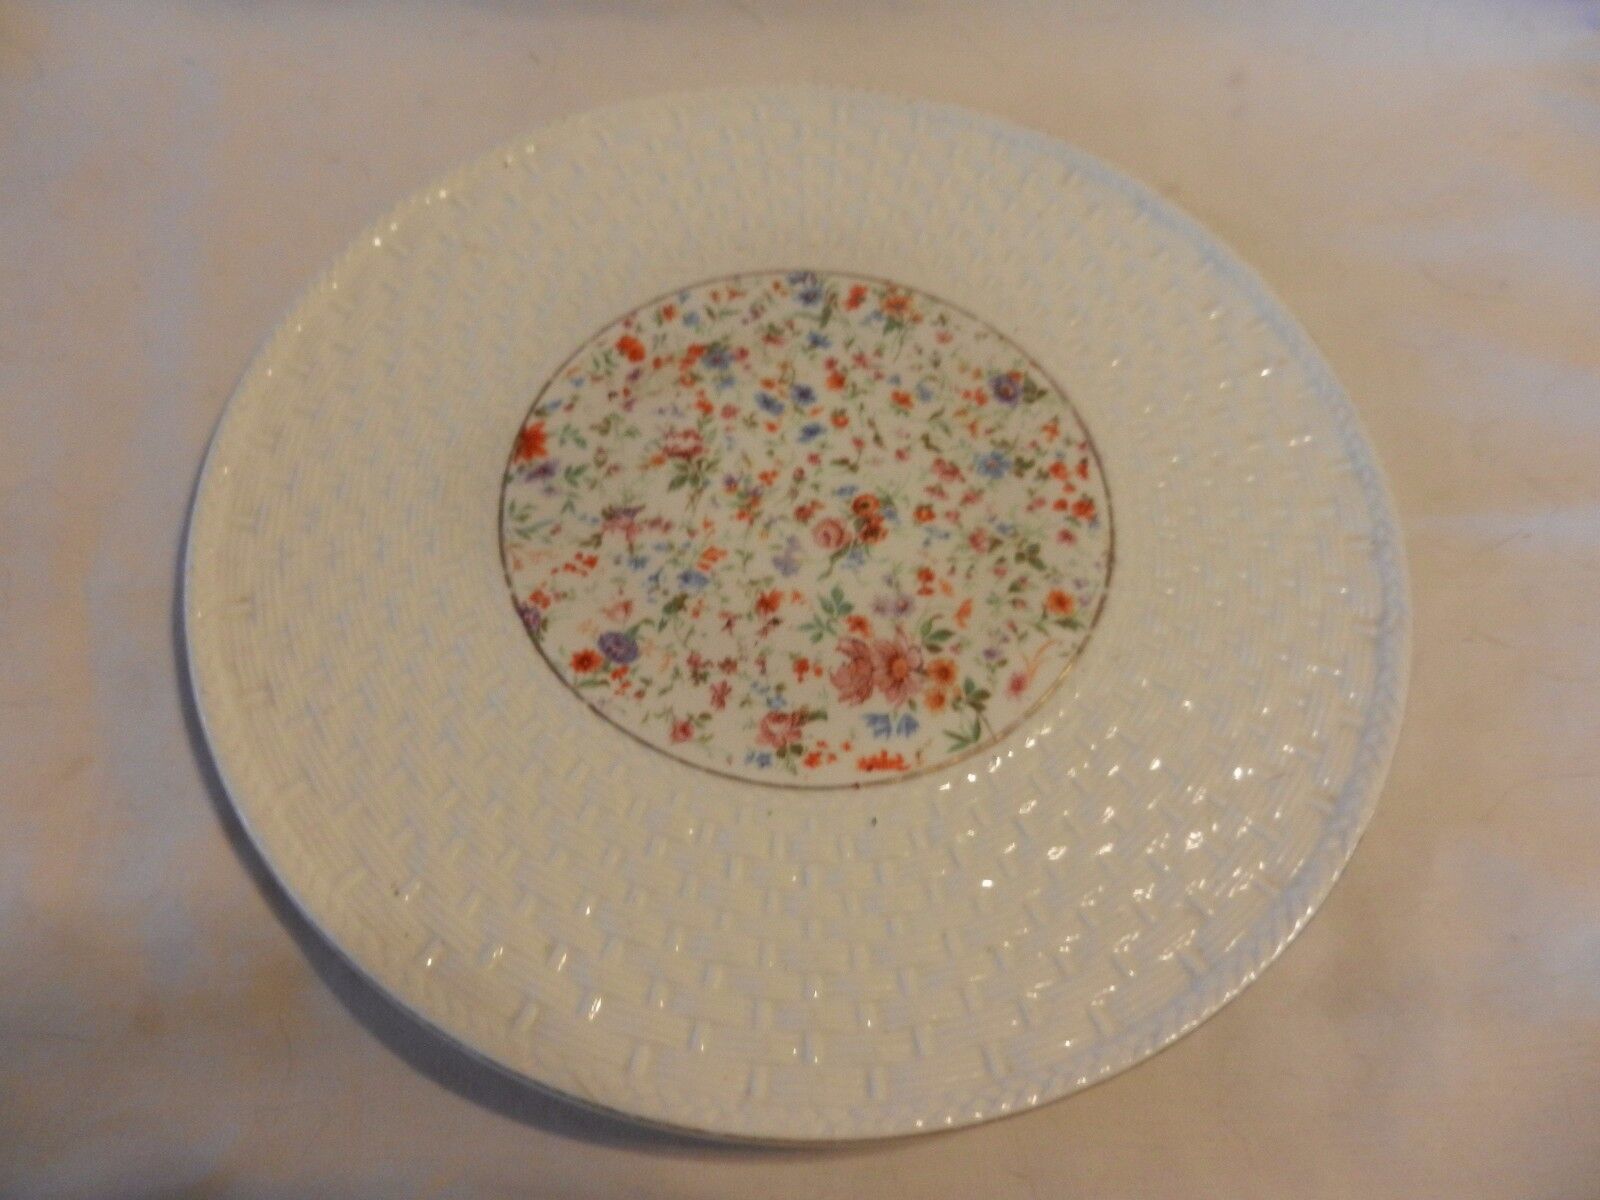 Primary image for Vintage ERPhila Cake Serving Plate Flowers & Garland Czechoslovakia 